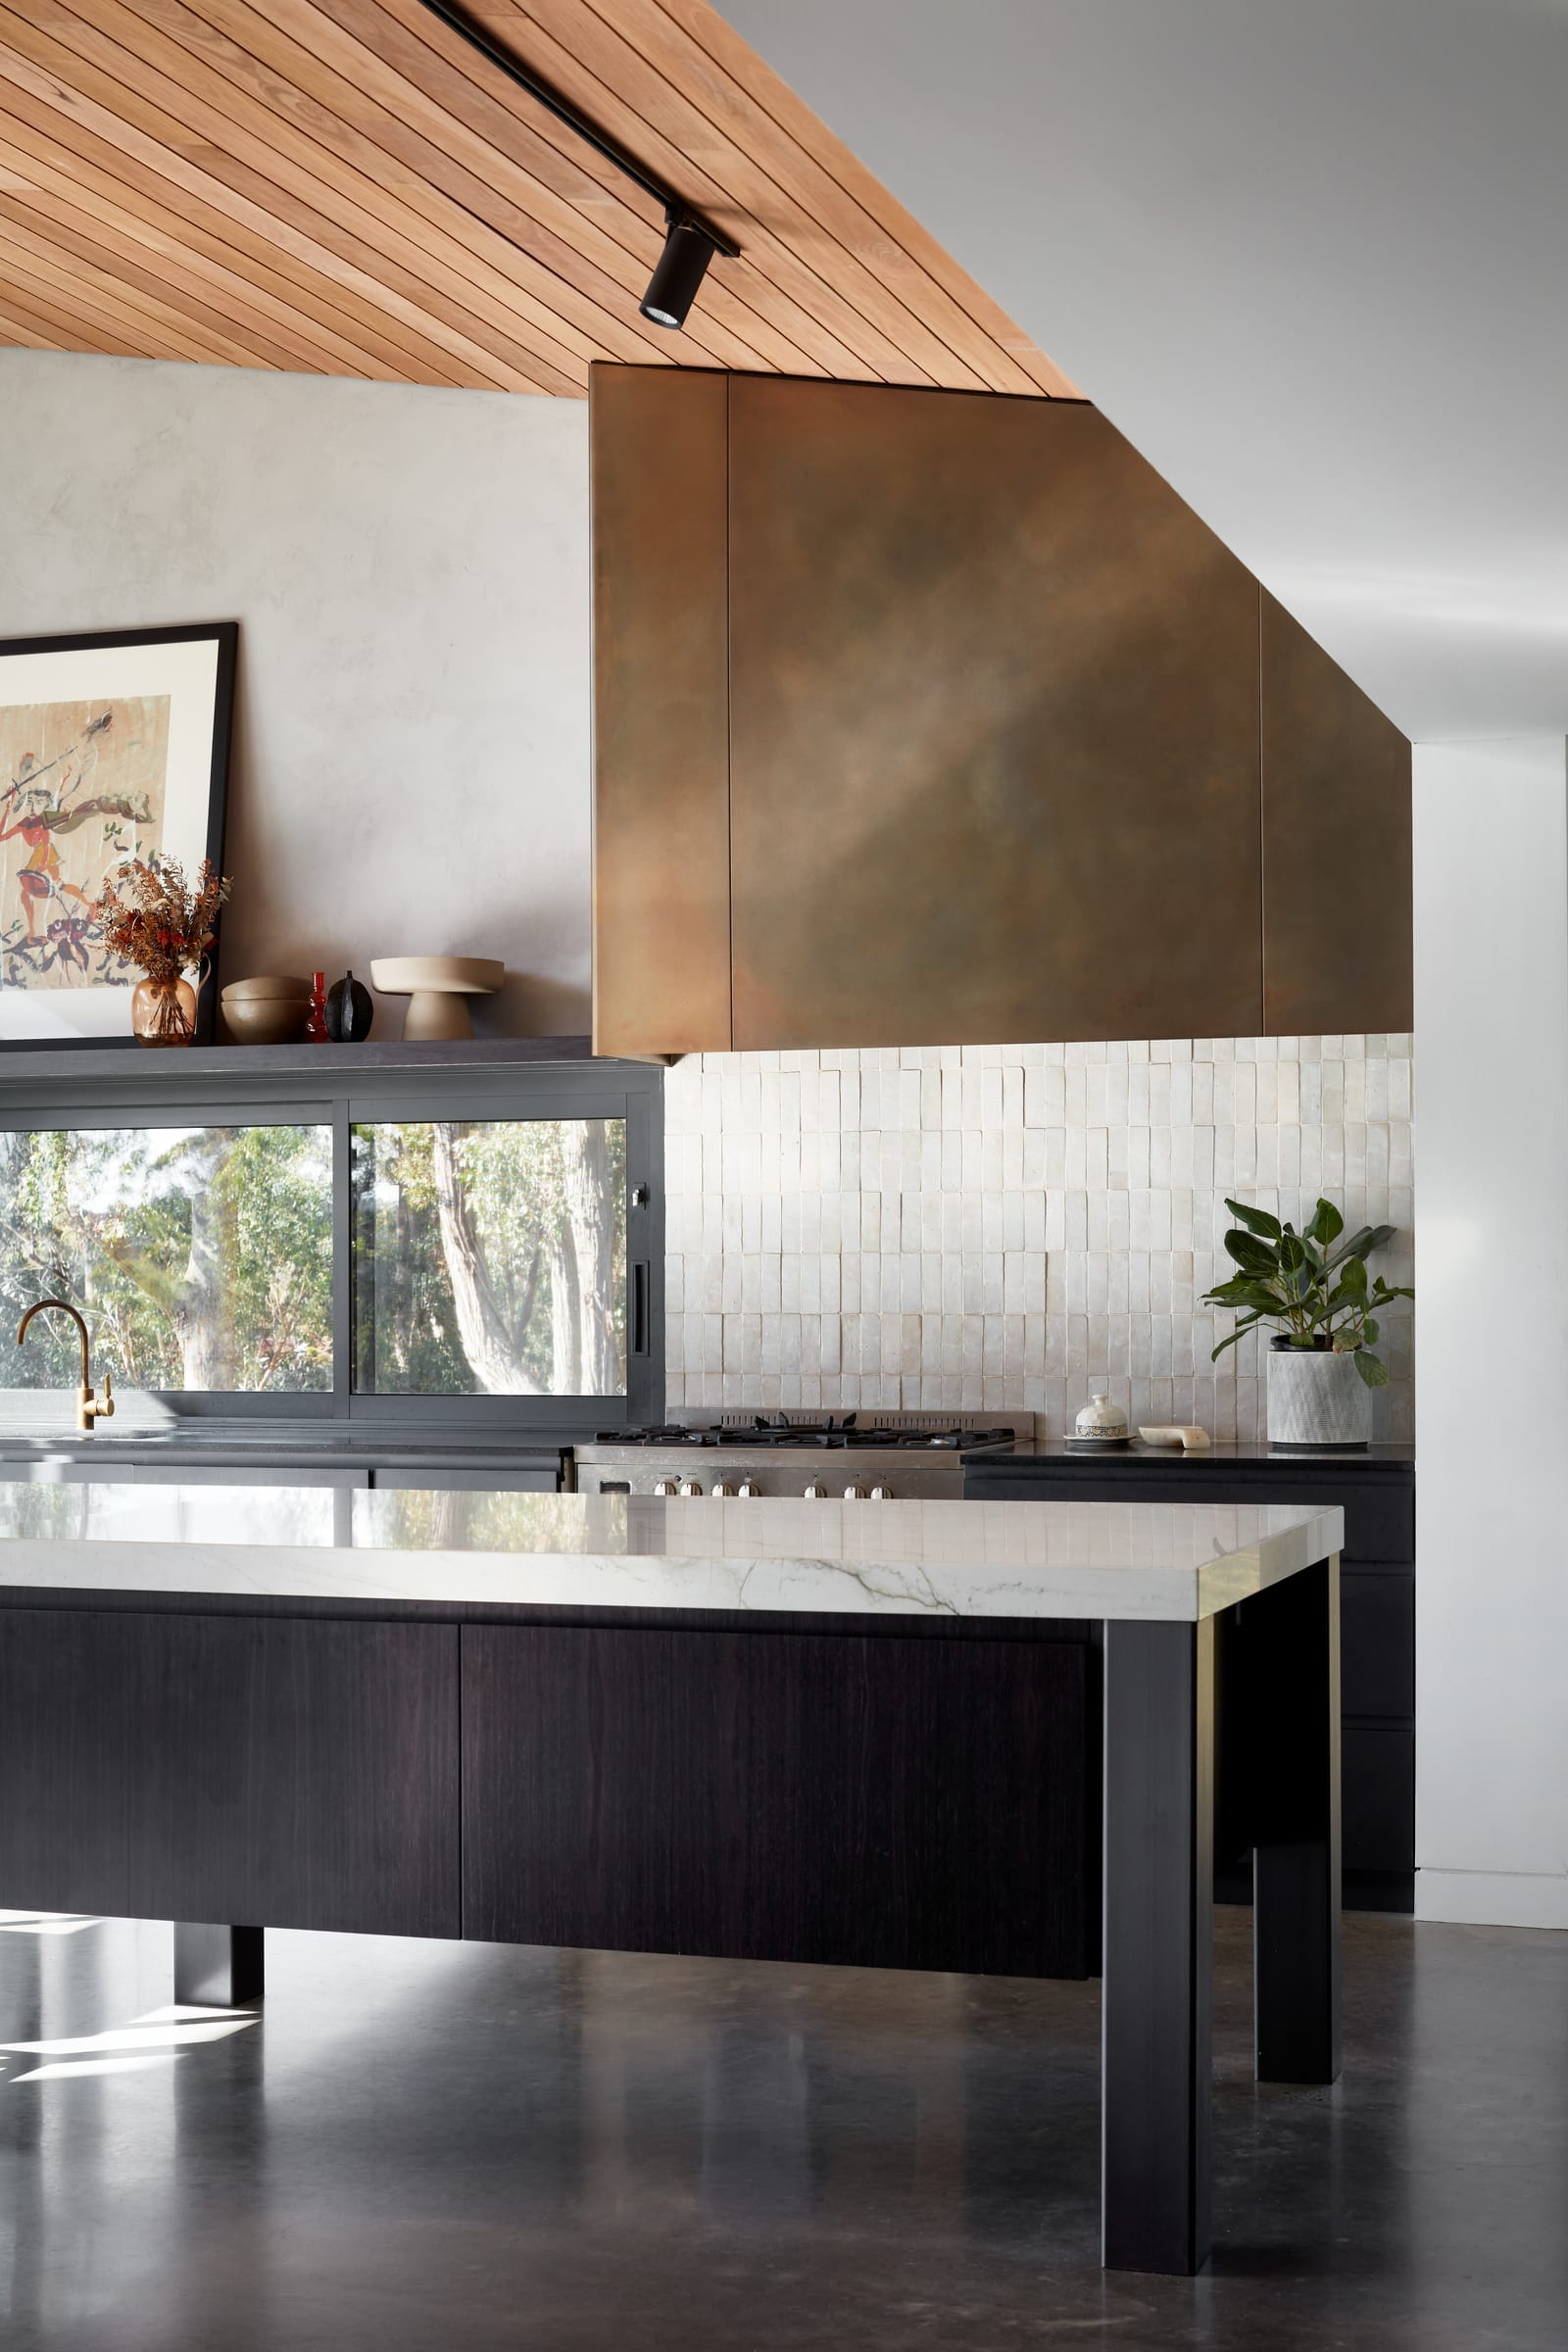 House Woodland by AO Design Studio. The image shows a modern kitchen in House Woodland by AD Design Studio, characterized by its clean lines and a mix of materials. The prominent feature is a large copper hood over the island, contrasting with the white subway tile backsplash. The kitchen has dark countertops and light wooden cabinetry, creating a warm yet contemporary look. The space is well-lit with natural light from the windows.